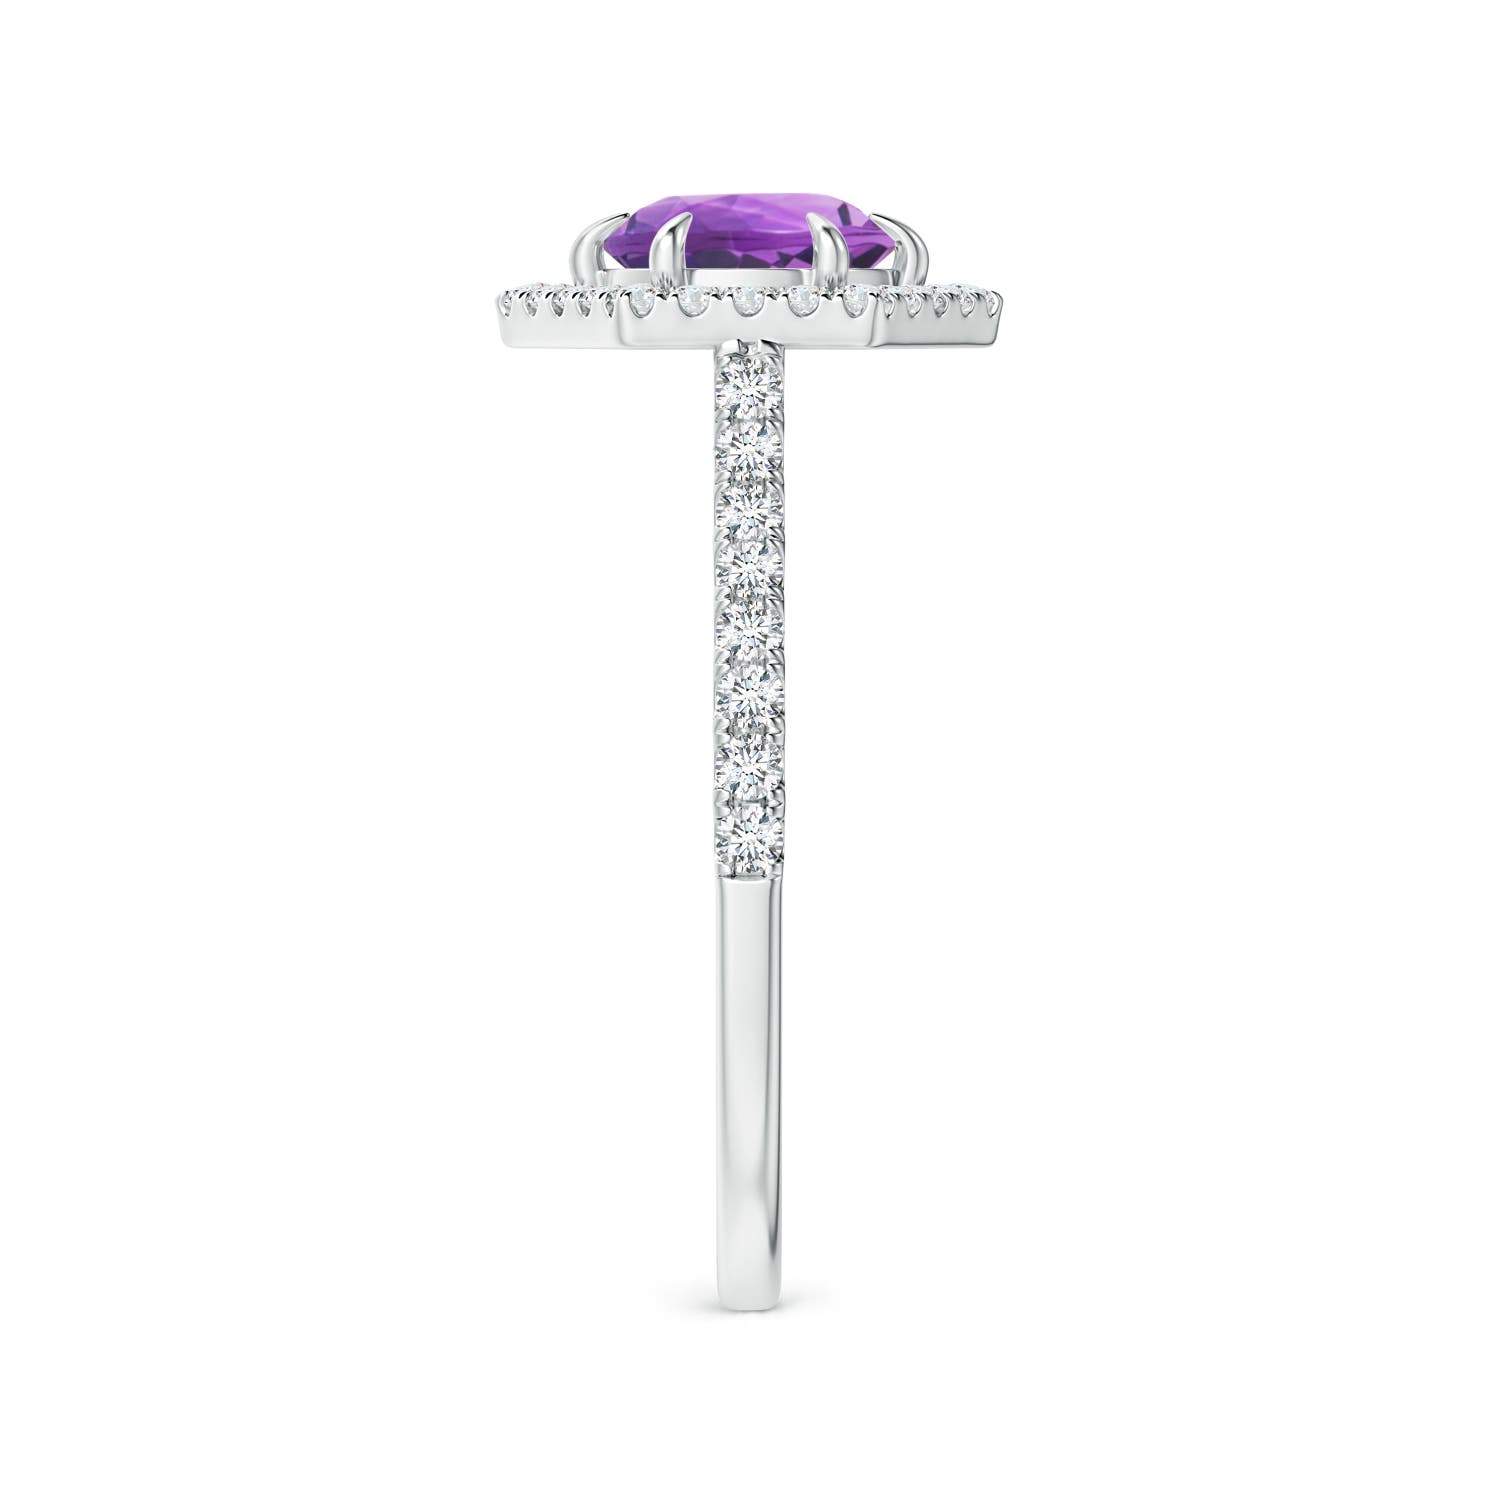 AA - Amethyst / 1.14 CT / 14 KT White Gold